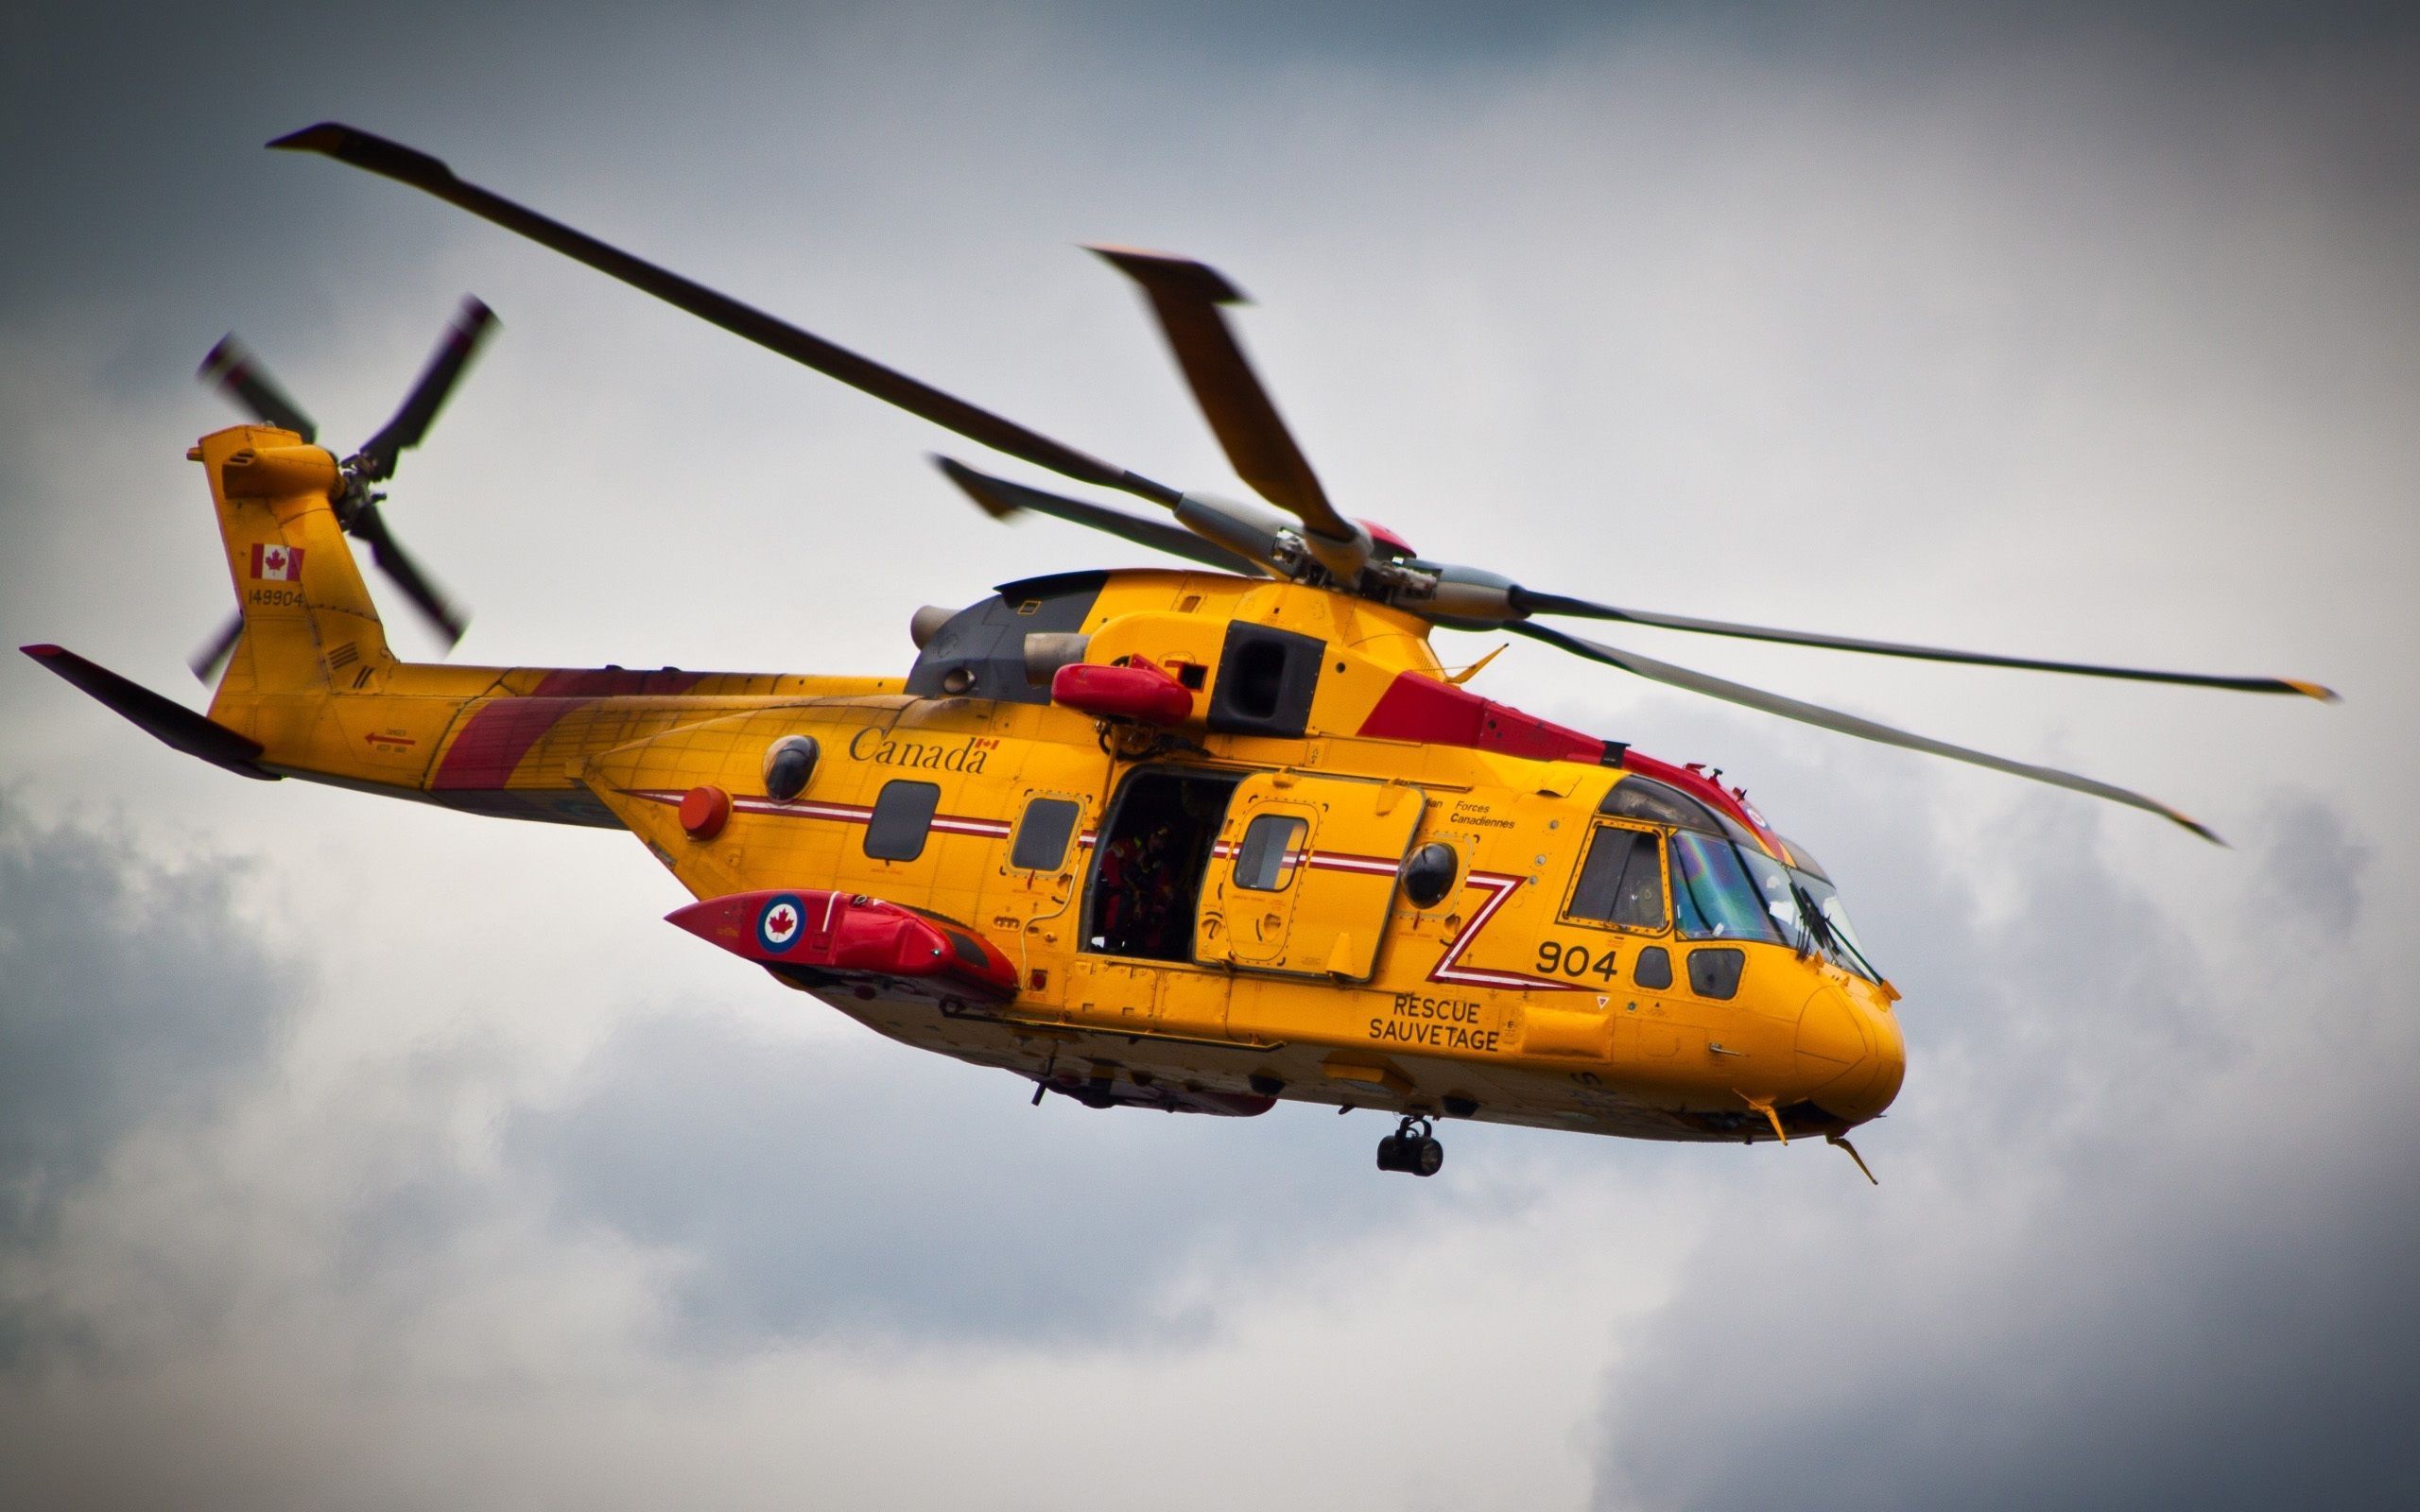 Yellow helicopter rescue flight Canada wallpaper 2560x1600. Helicopter, Search and rescue, Canada